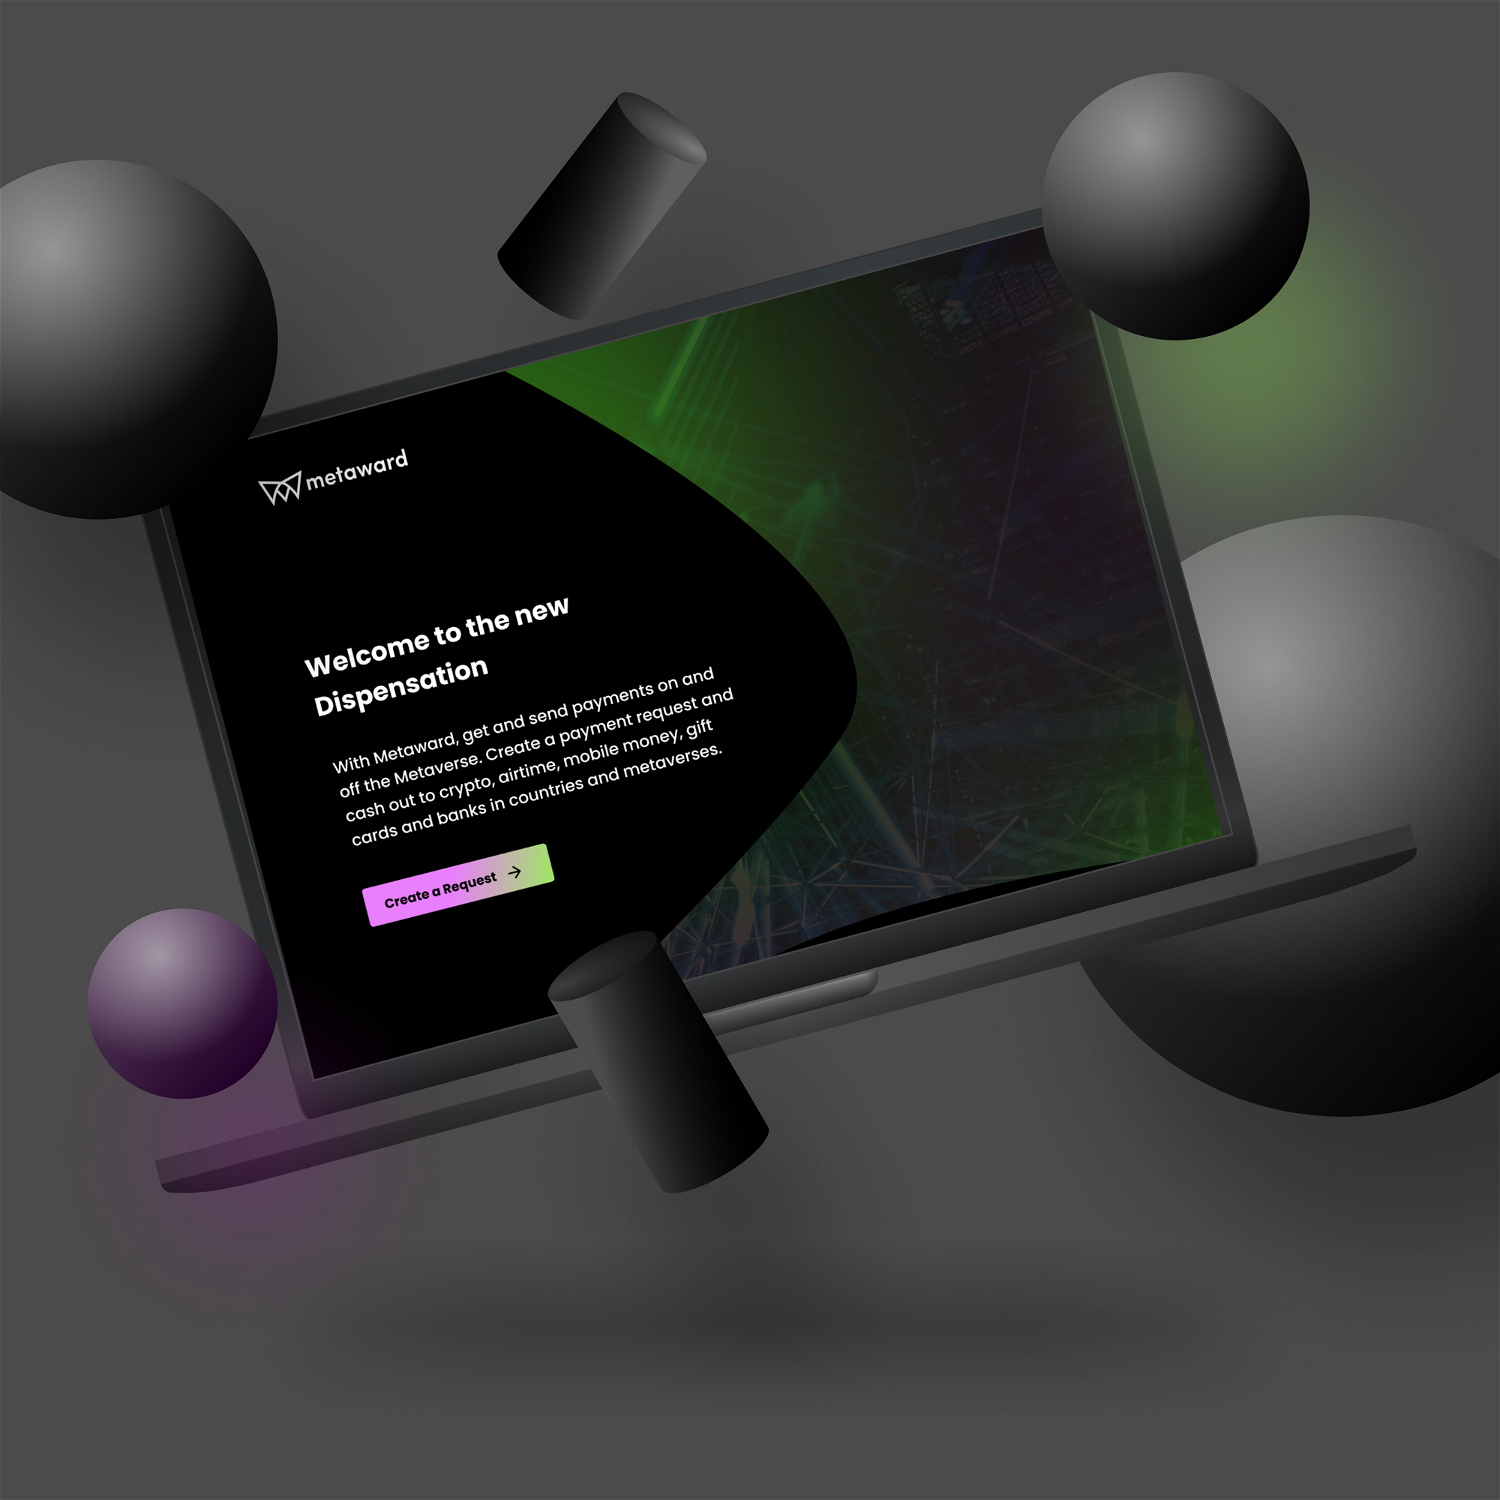 Metaward - Get paid for work in the metaverse.